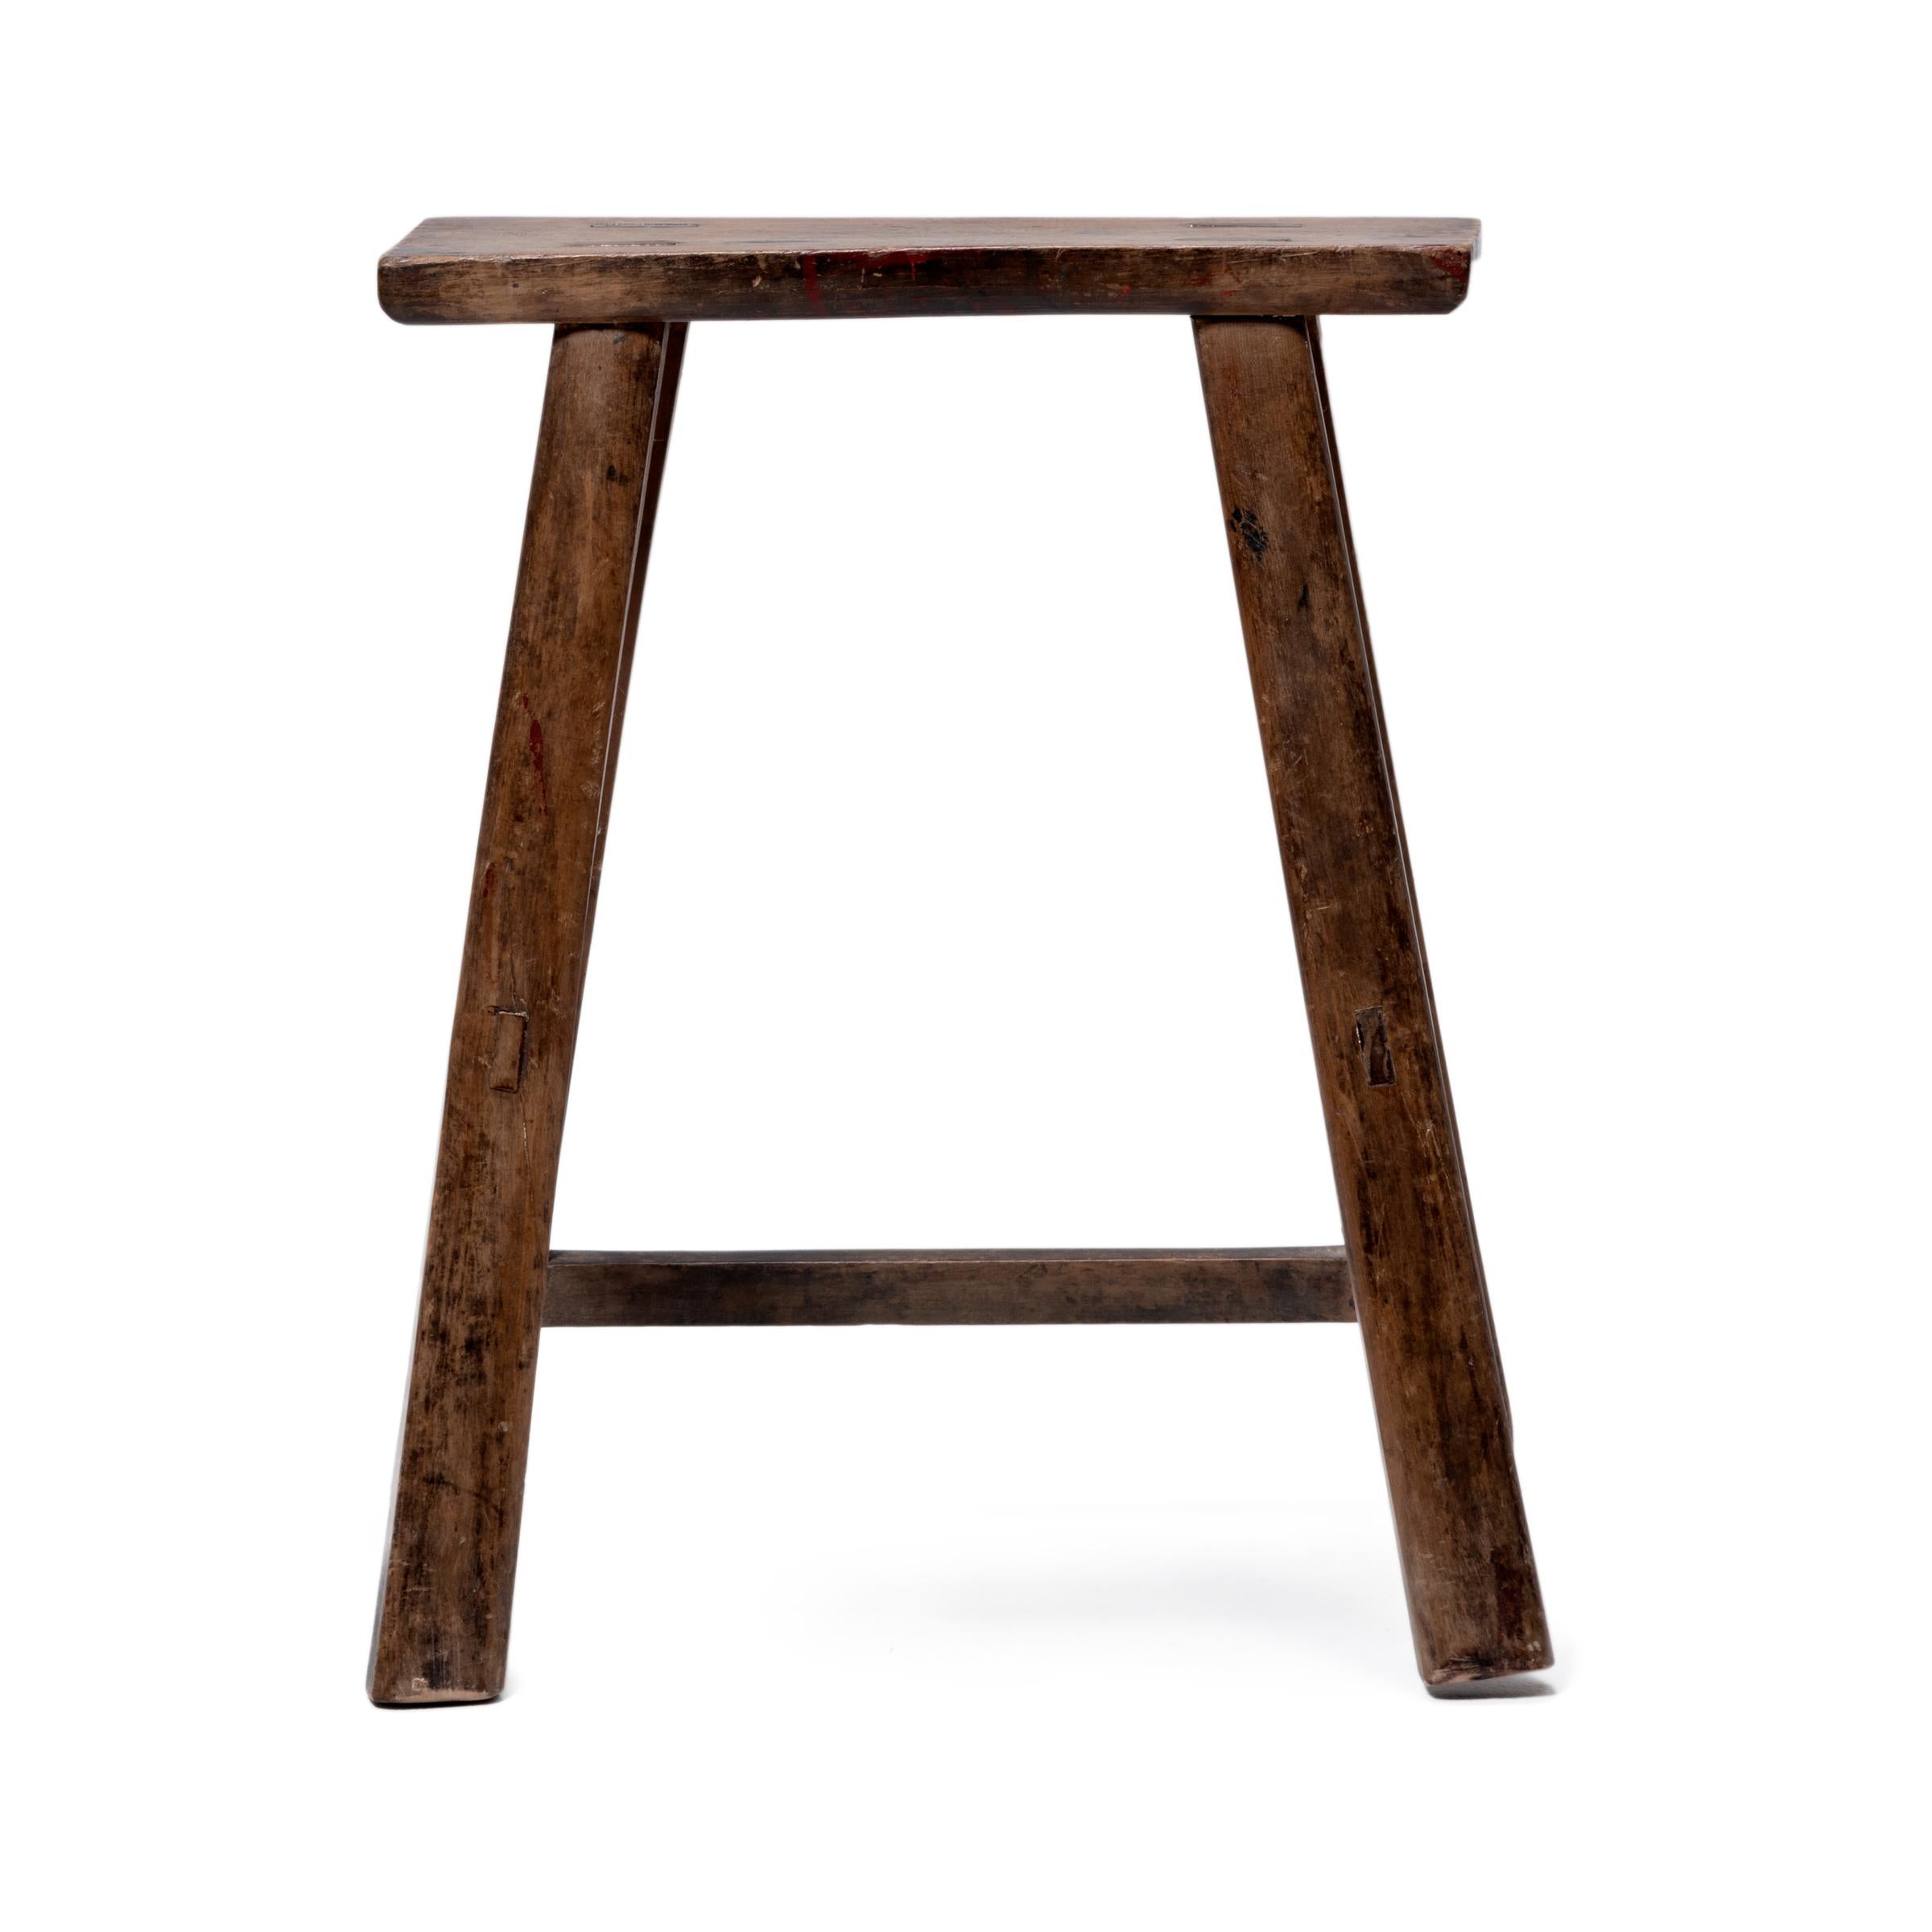 This 19th century elmwood stool from China's Shanxi province features a narrow seat supported by splayed legs, linked with simple stretcher bars. The stool was constructed with mortise-and-tenon joinery techniques, without the use of nails or